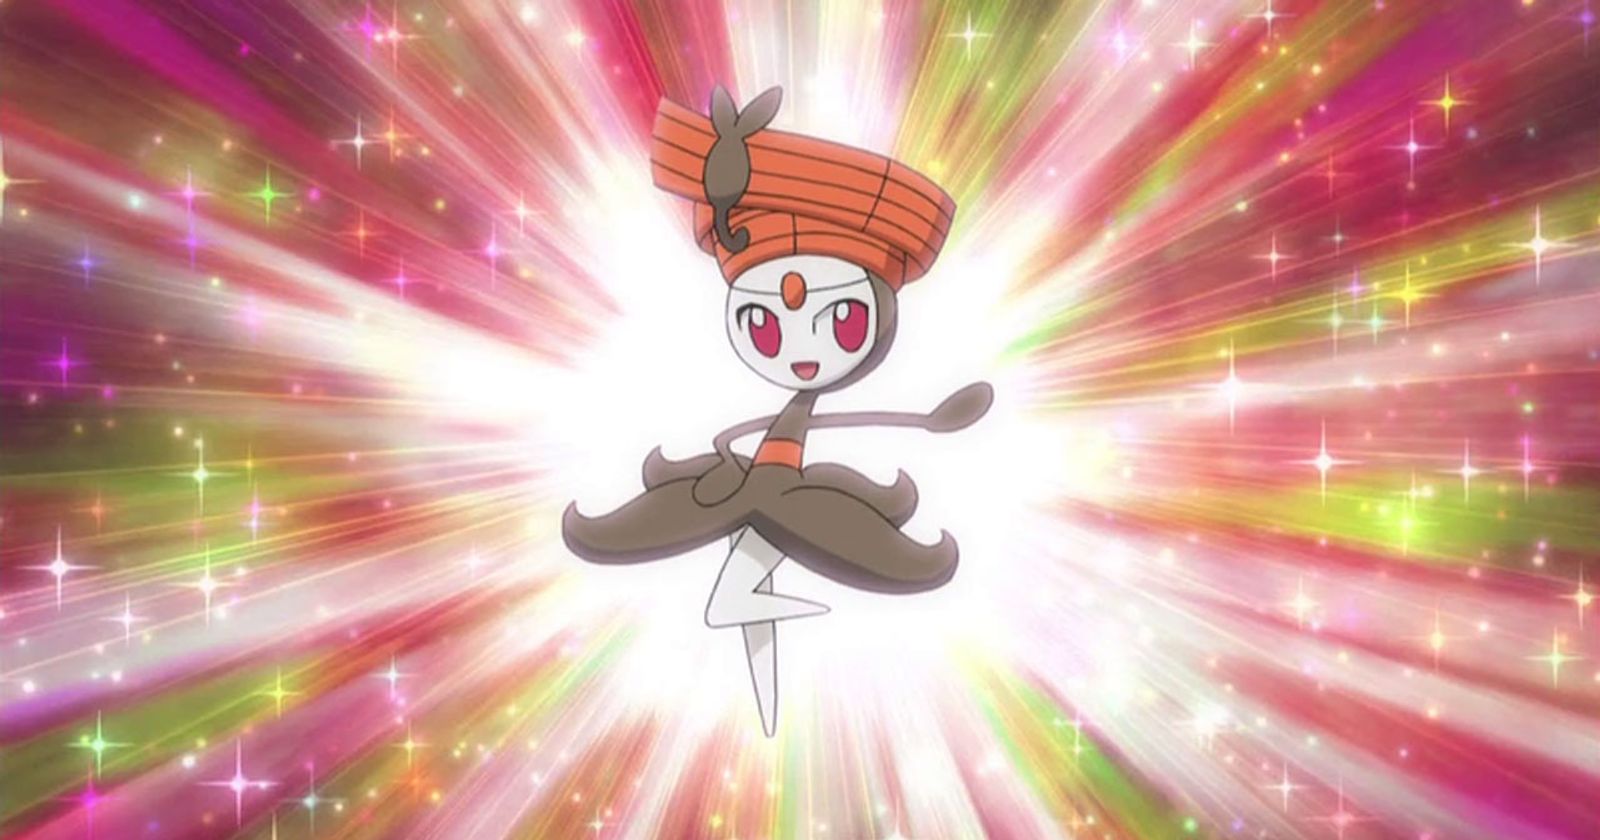 Meloetta Makes a Perfect Case for Real-Time Form Switching in Pokemon GO